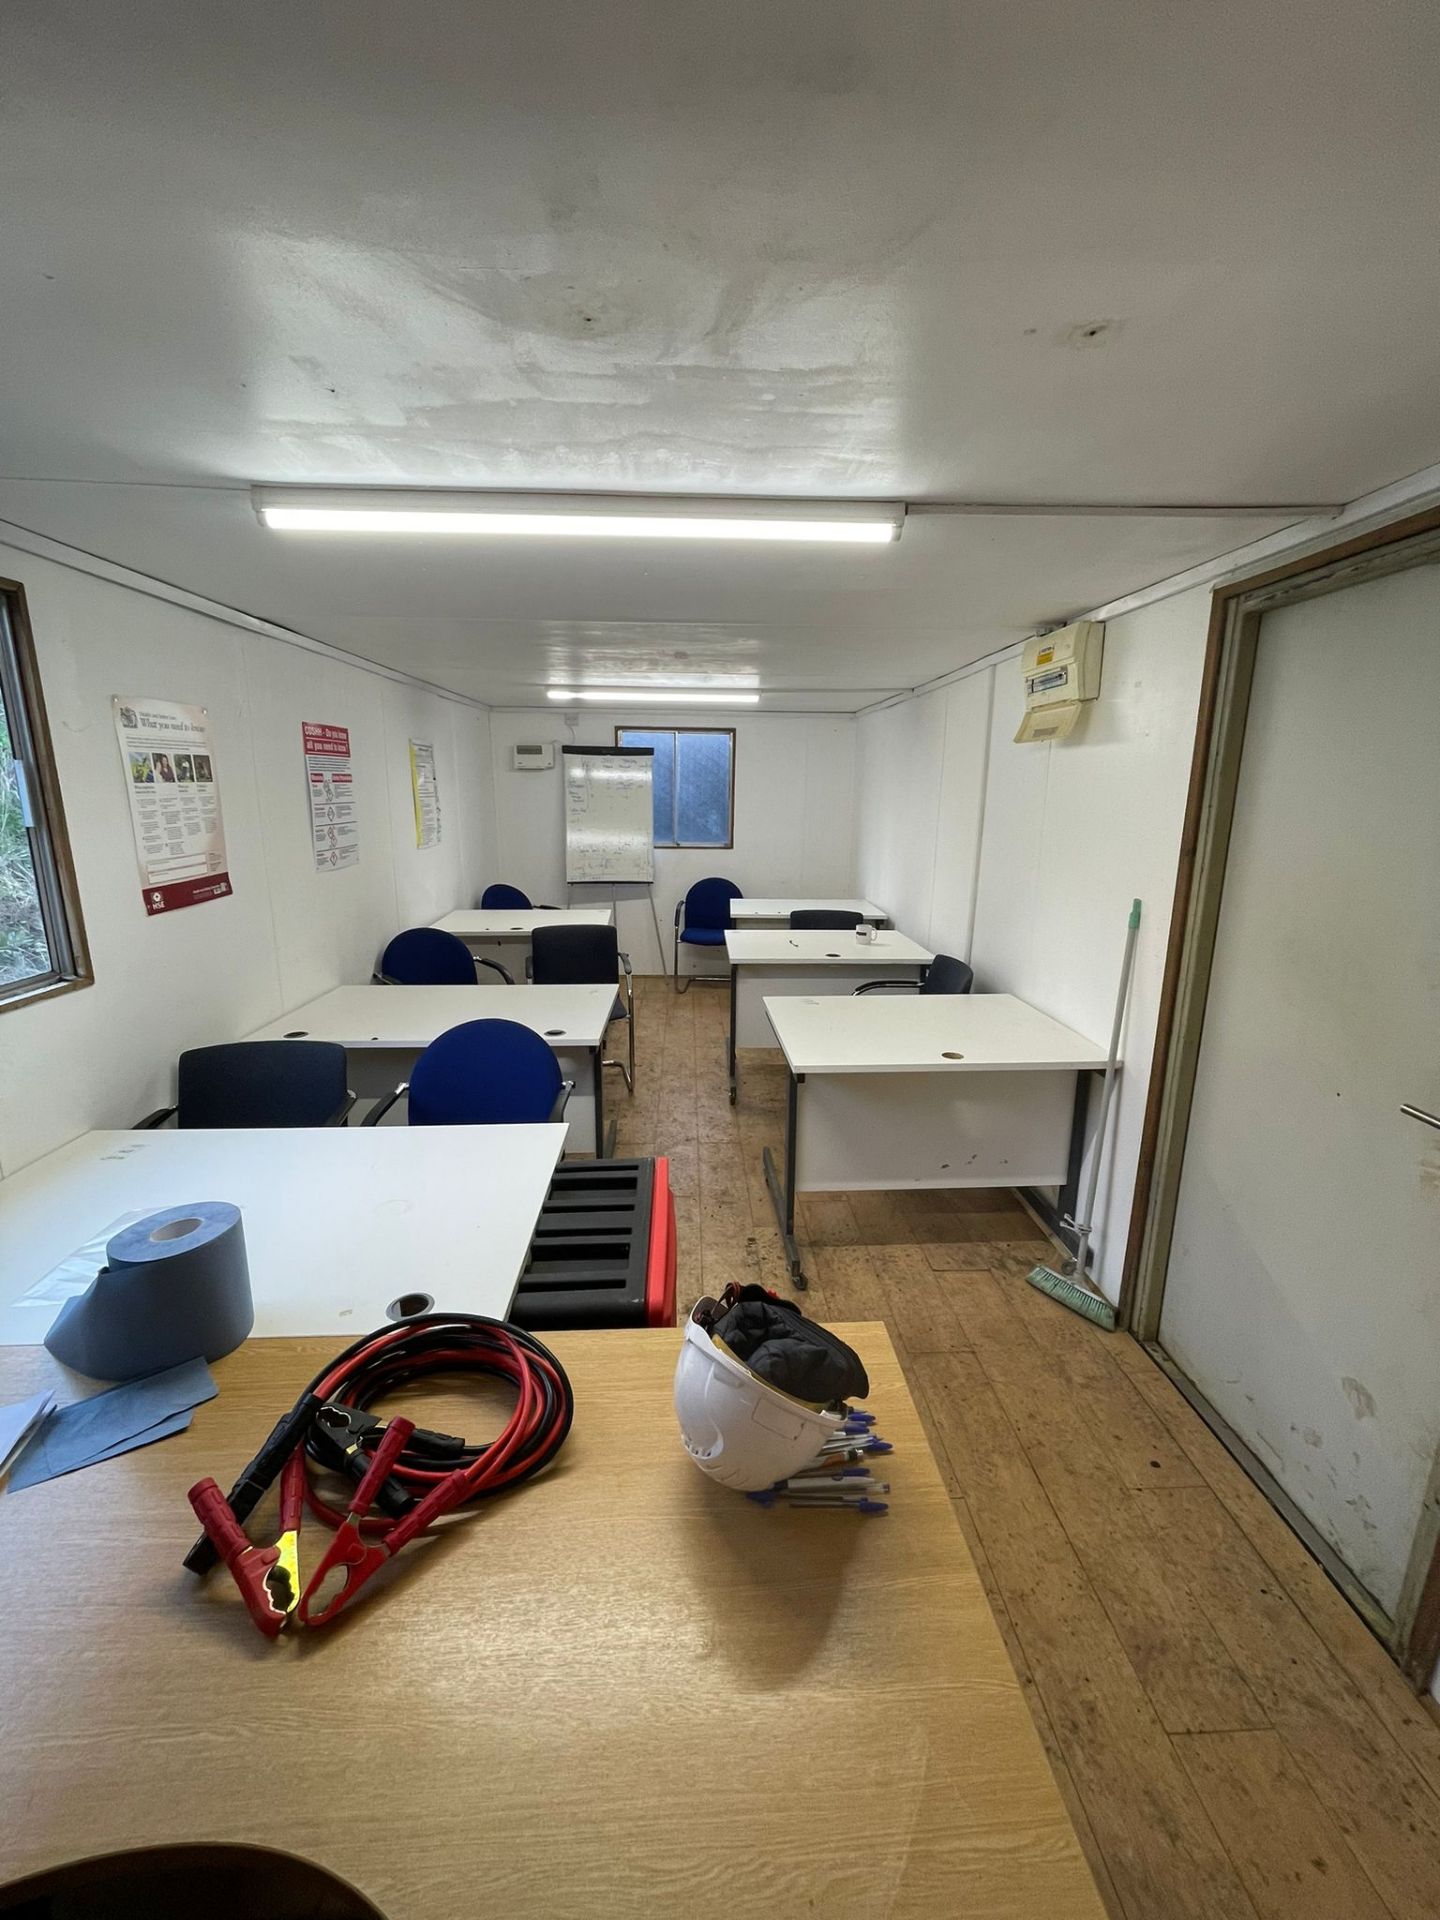 32FT X 10FT ANTI-VANDAL CABIN - OFFICE/ TRAINING ROOM AND SMALL CANTEEN AREA. - Bild 4 aus 8